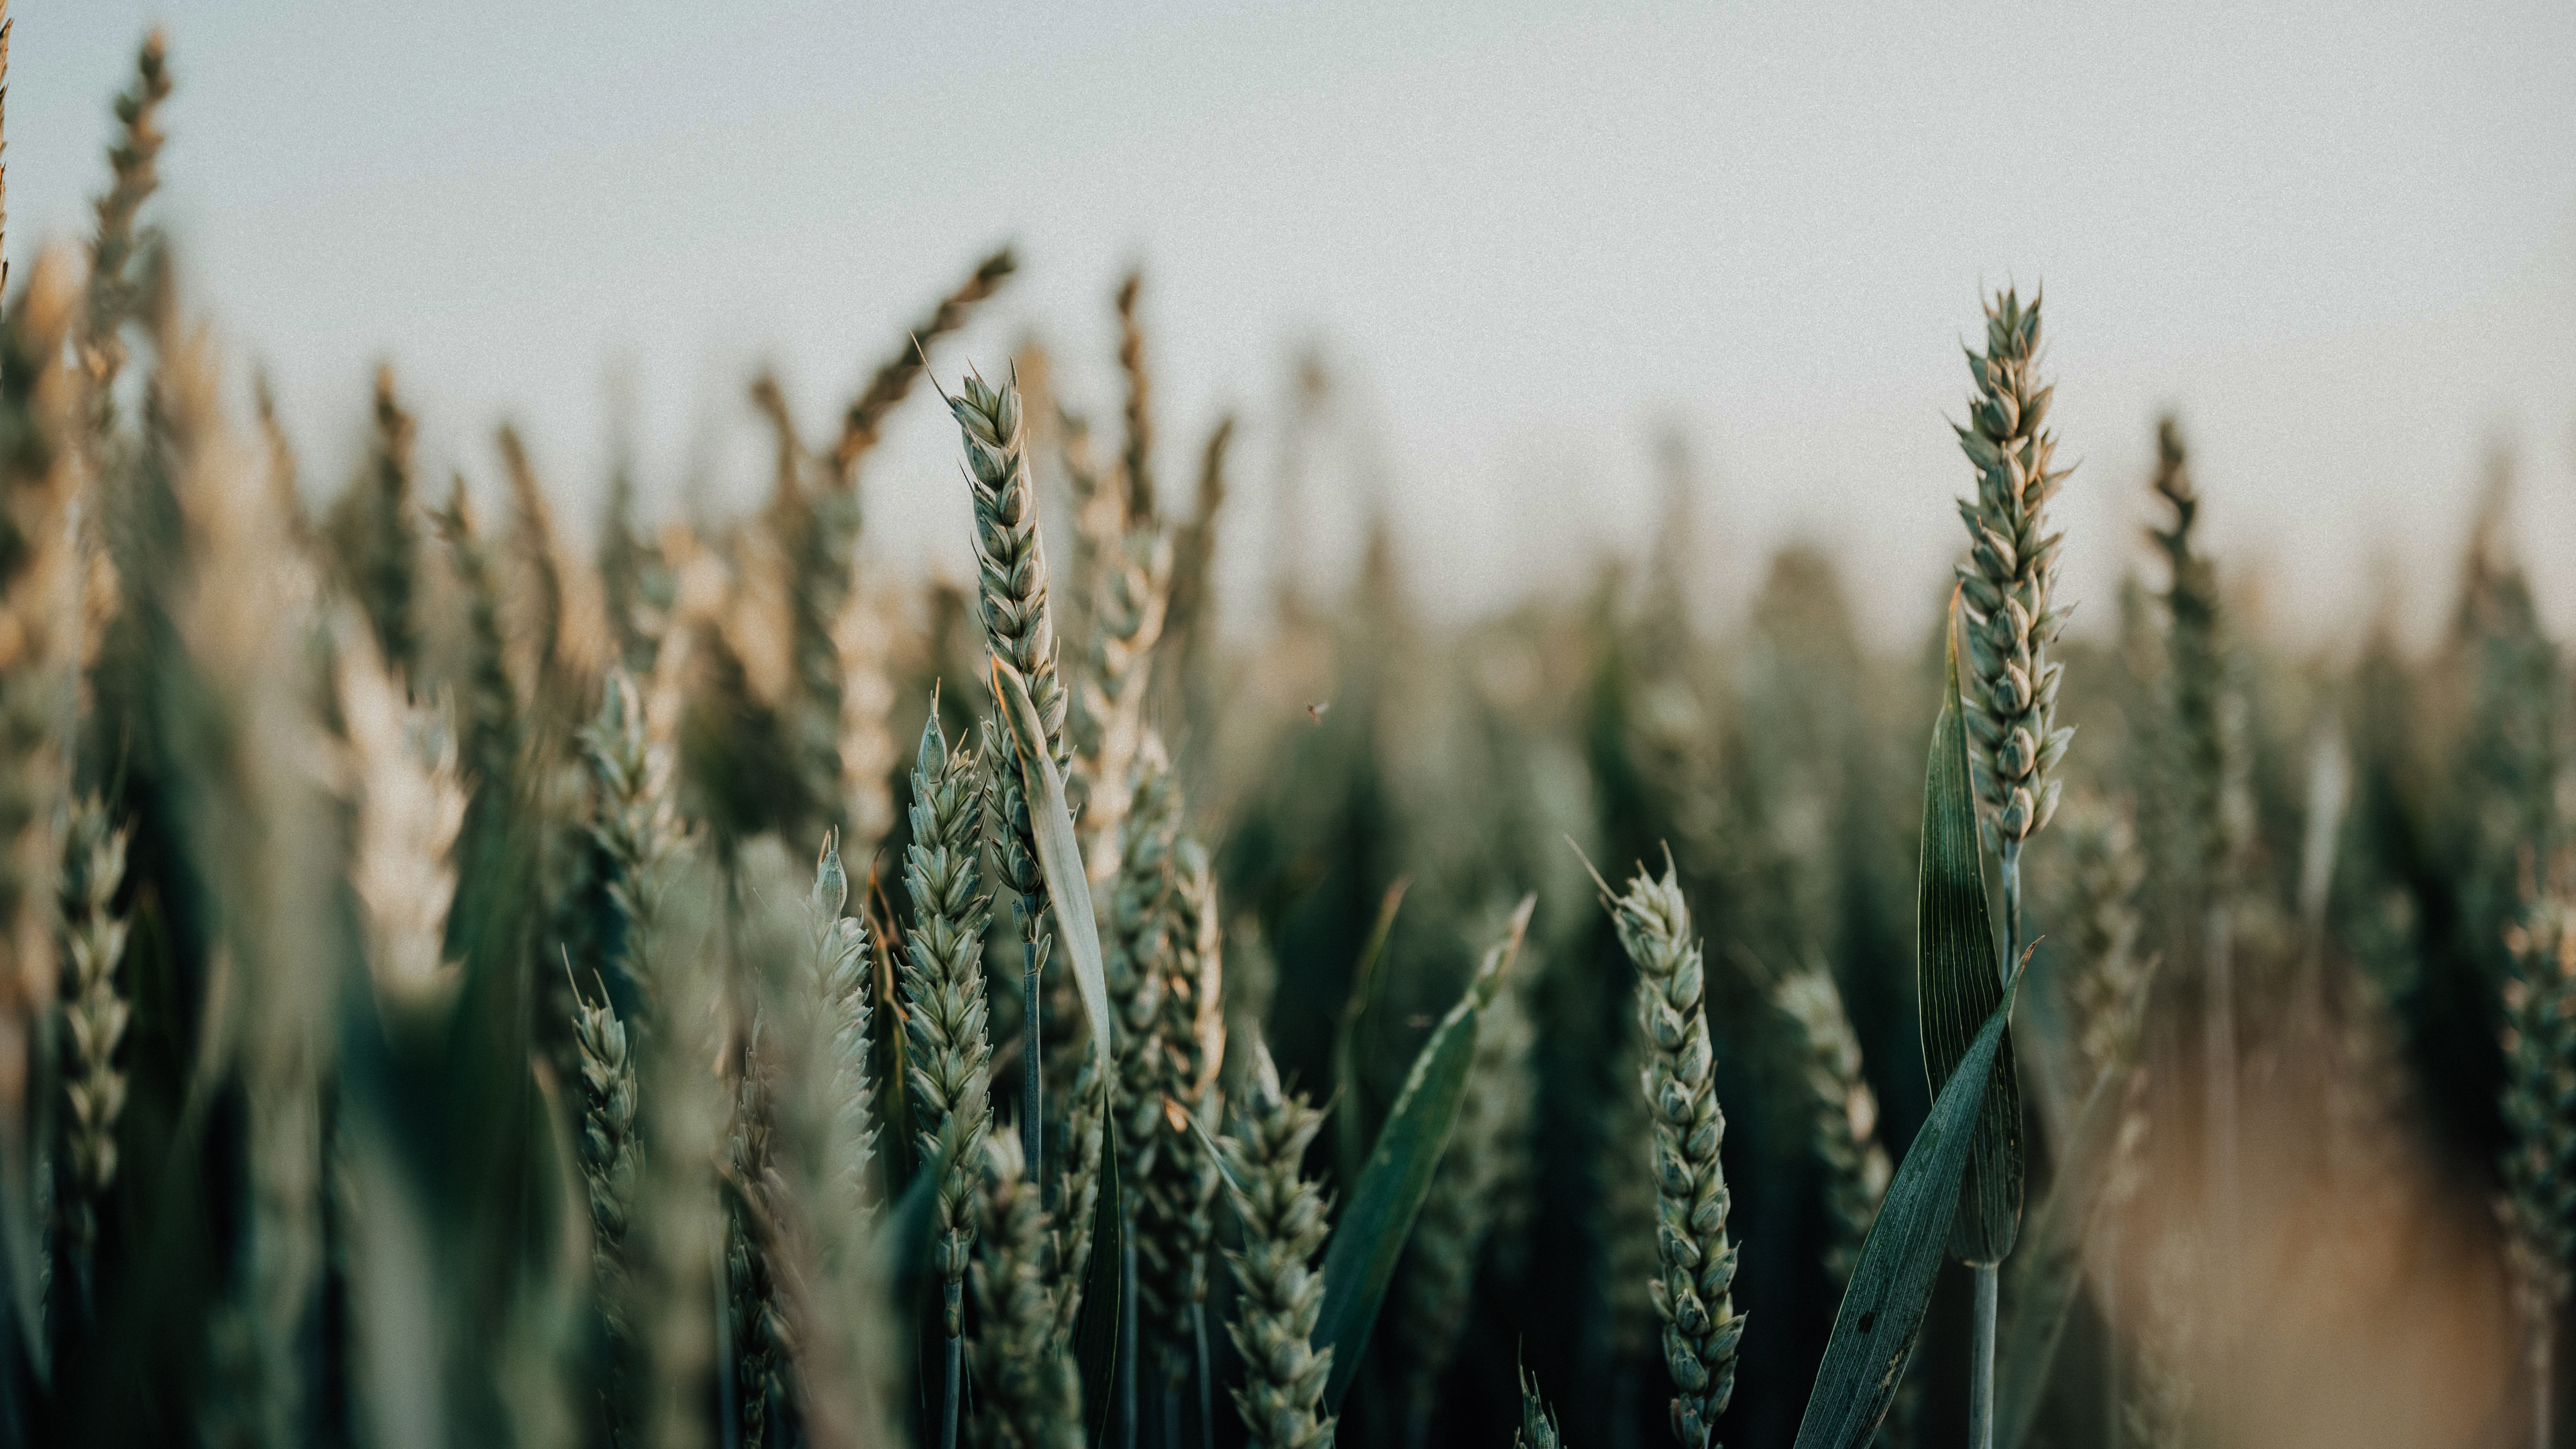 Black Sea wheat prices hit $325 and SRW – $8, is the rally over?